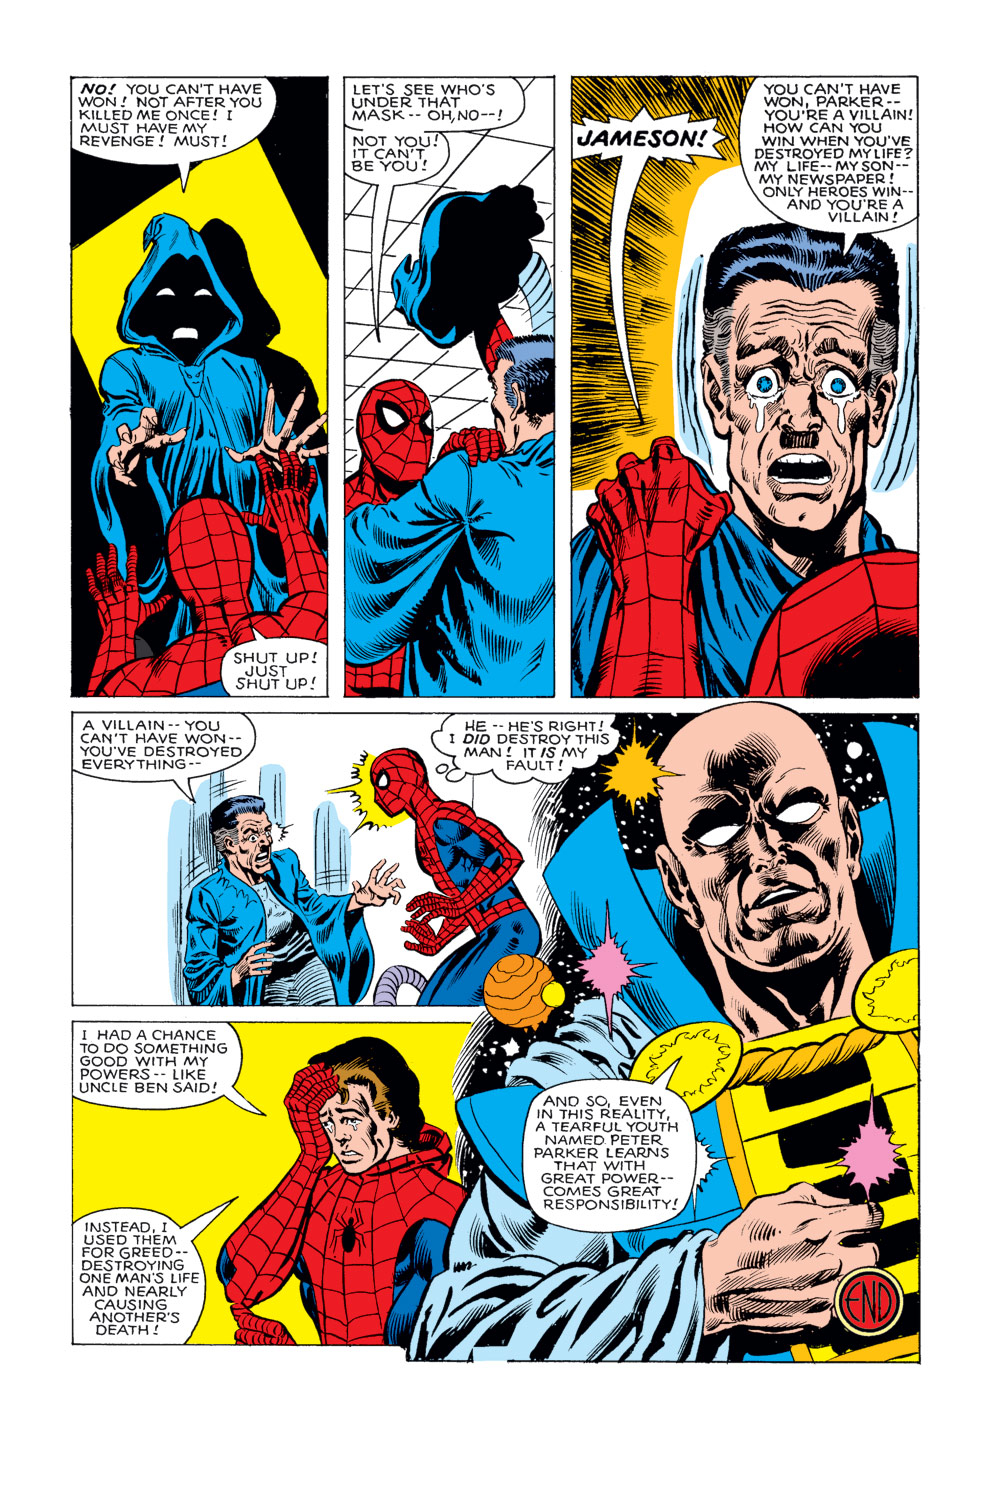 What If? (1977) issue 19 - Spider-Man had never become a crimefighter - Page 35